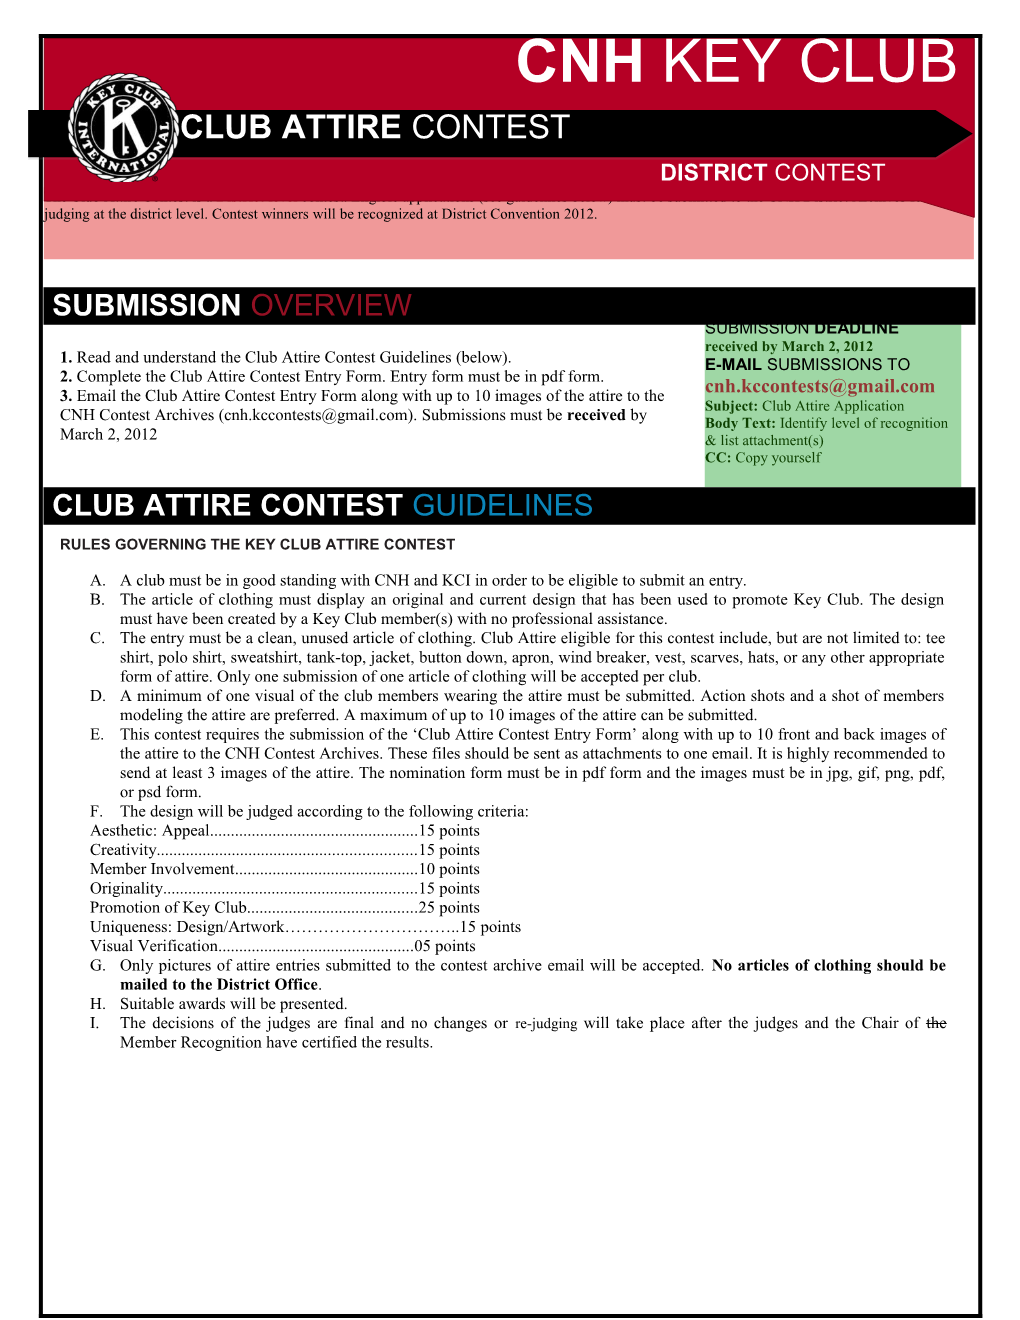 1. Read and Understand the Club Attire Contest Guidelines (Below)